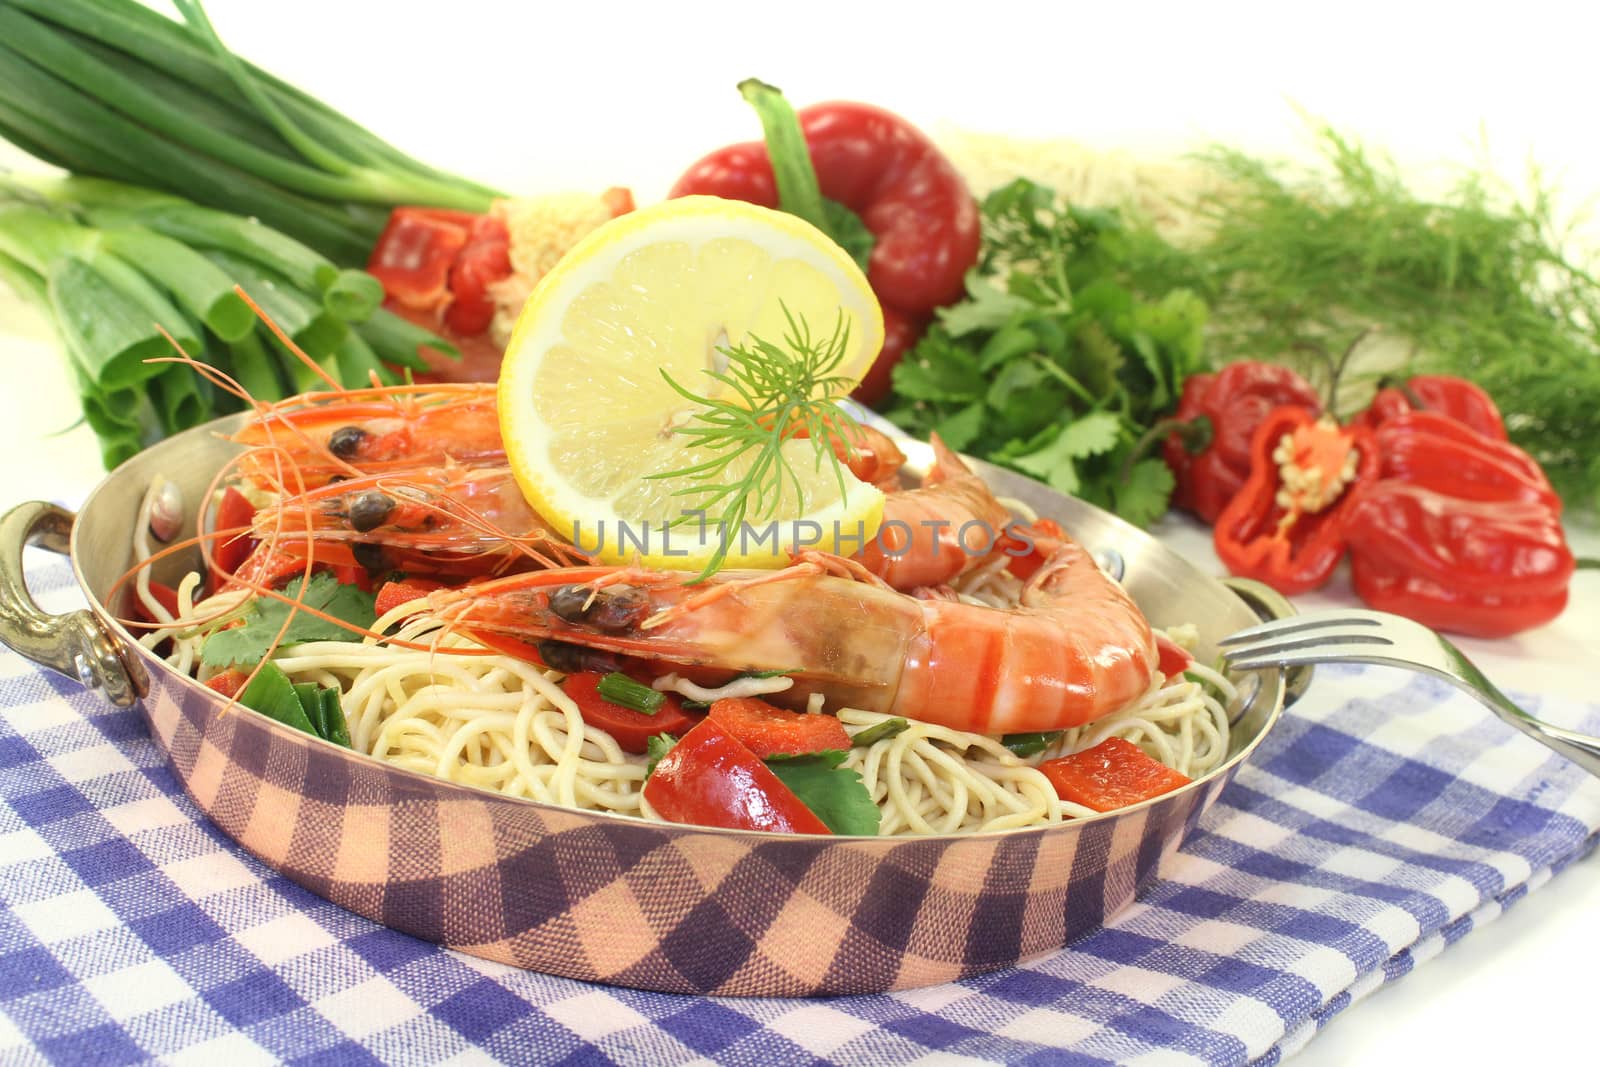 Prawns with Mie noodles, lemon, dill and coriander on a light background